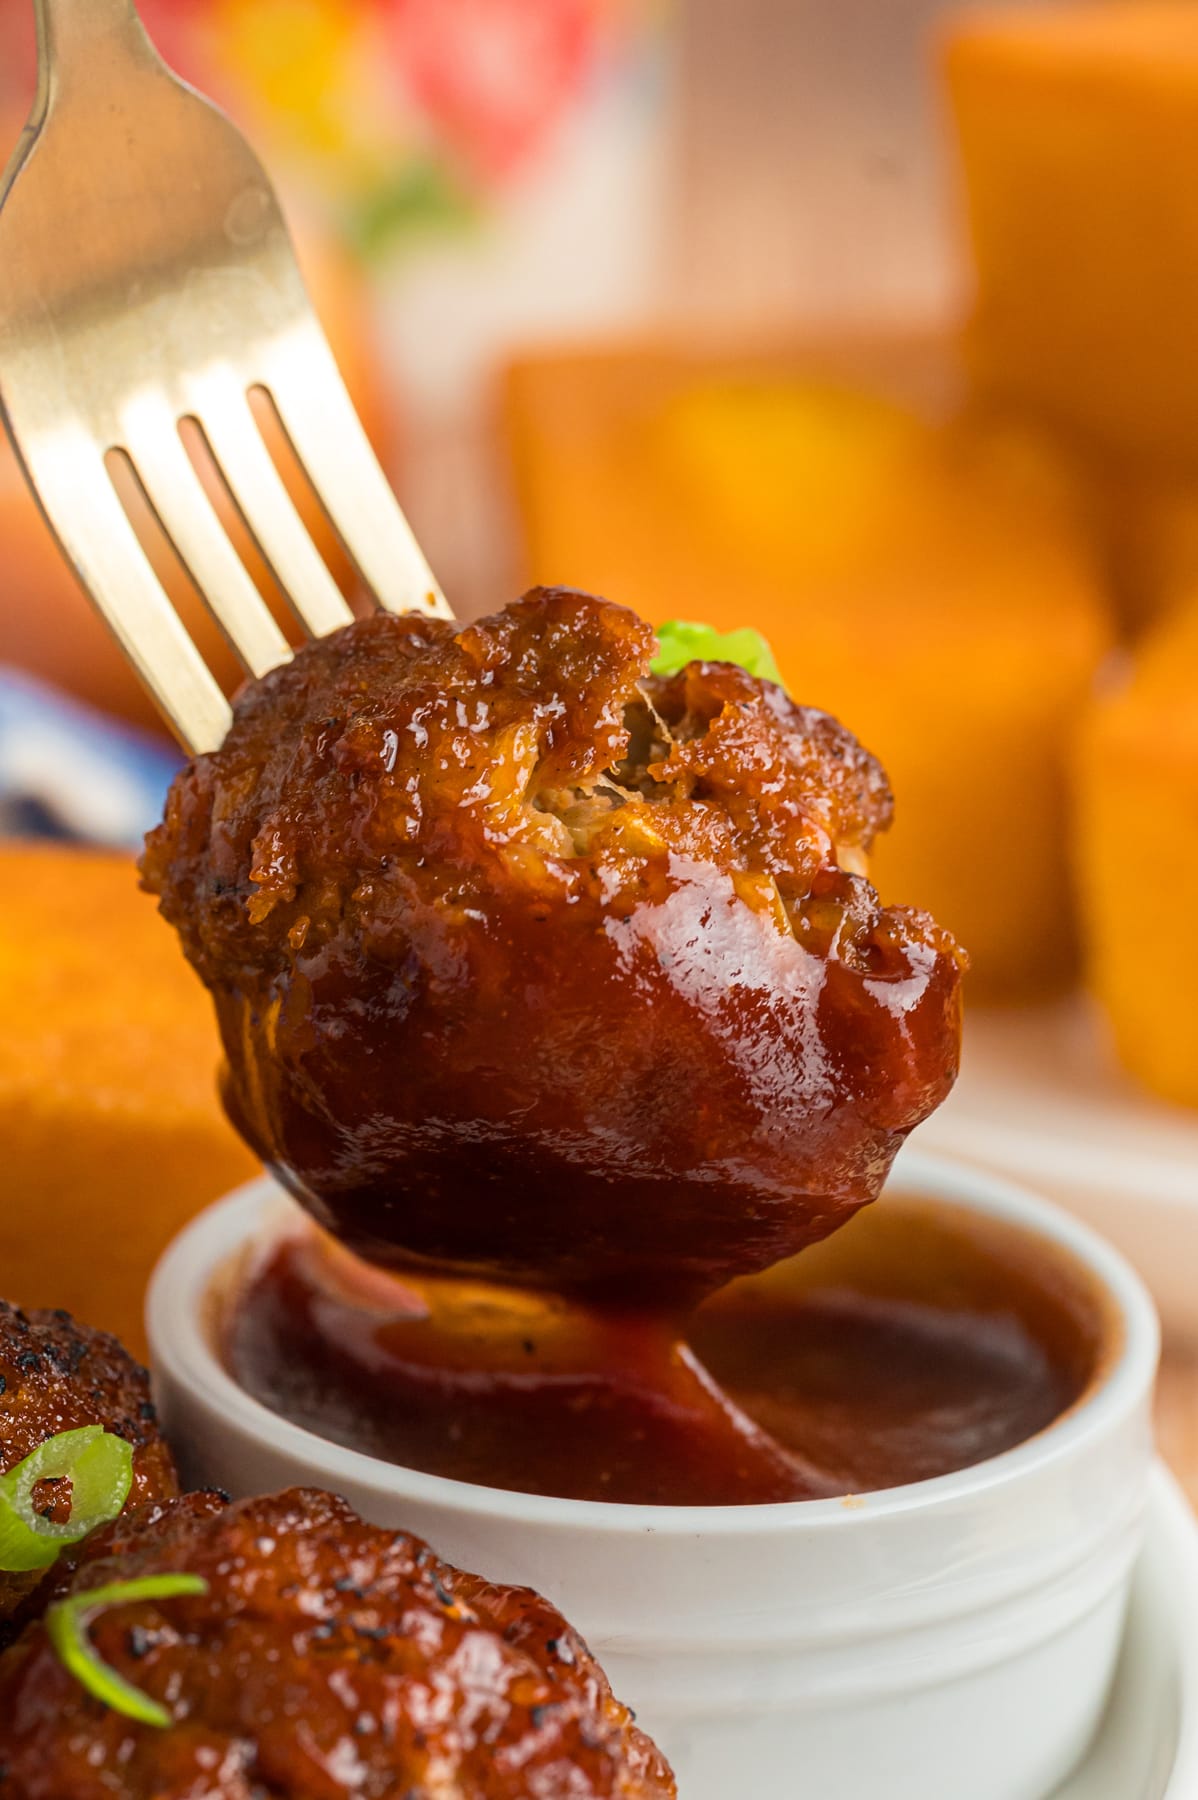 A meatball on a fork dipped in BBQ sauce